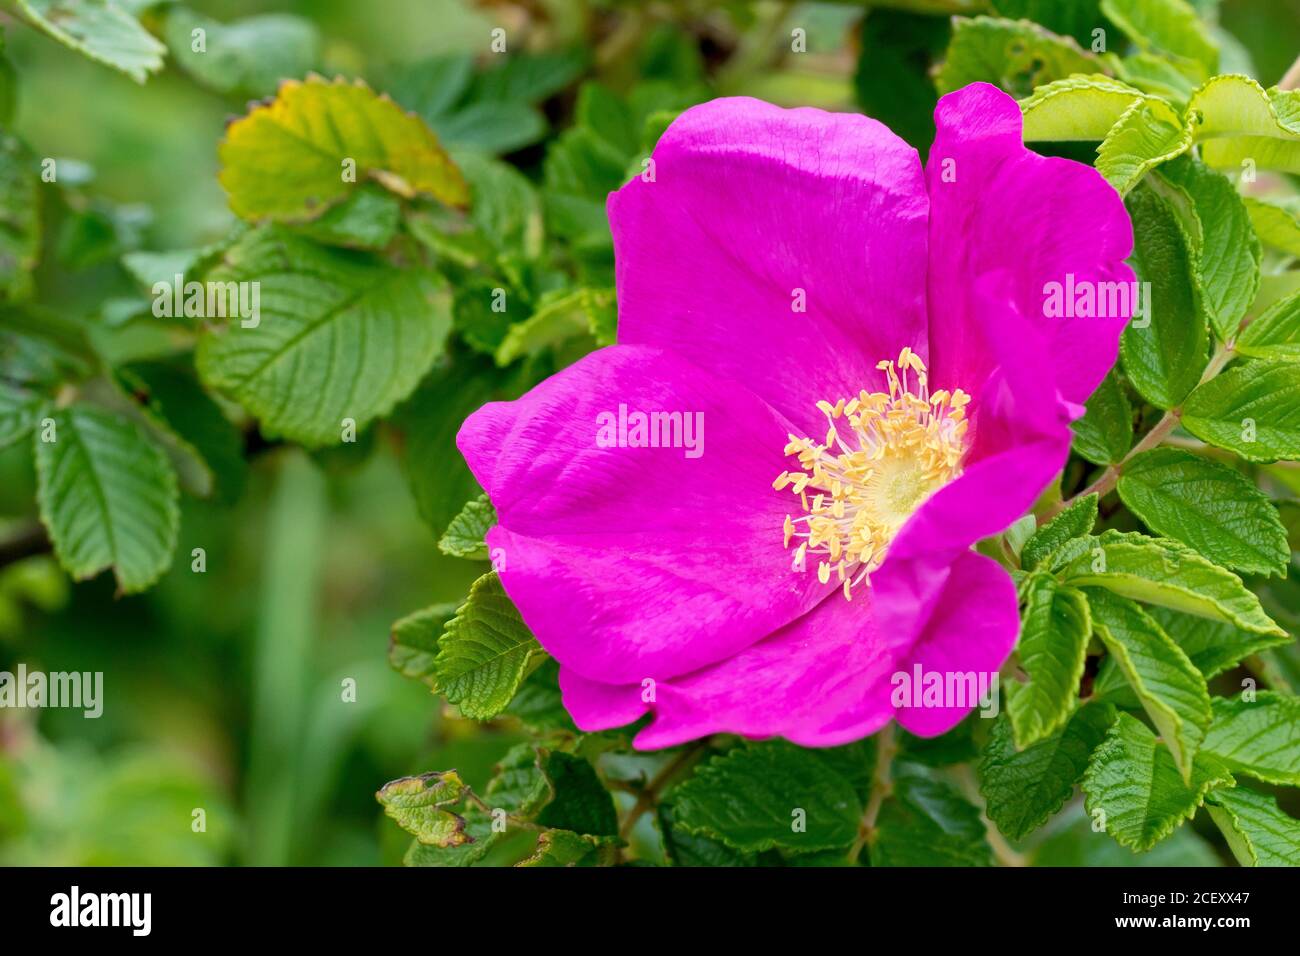 Wild Rose (rosa rugosa rubra), also known as Japanese Rose, close up of a single flower with leaves. Stock Photo